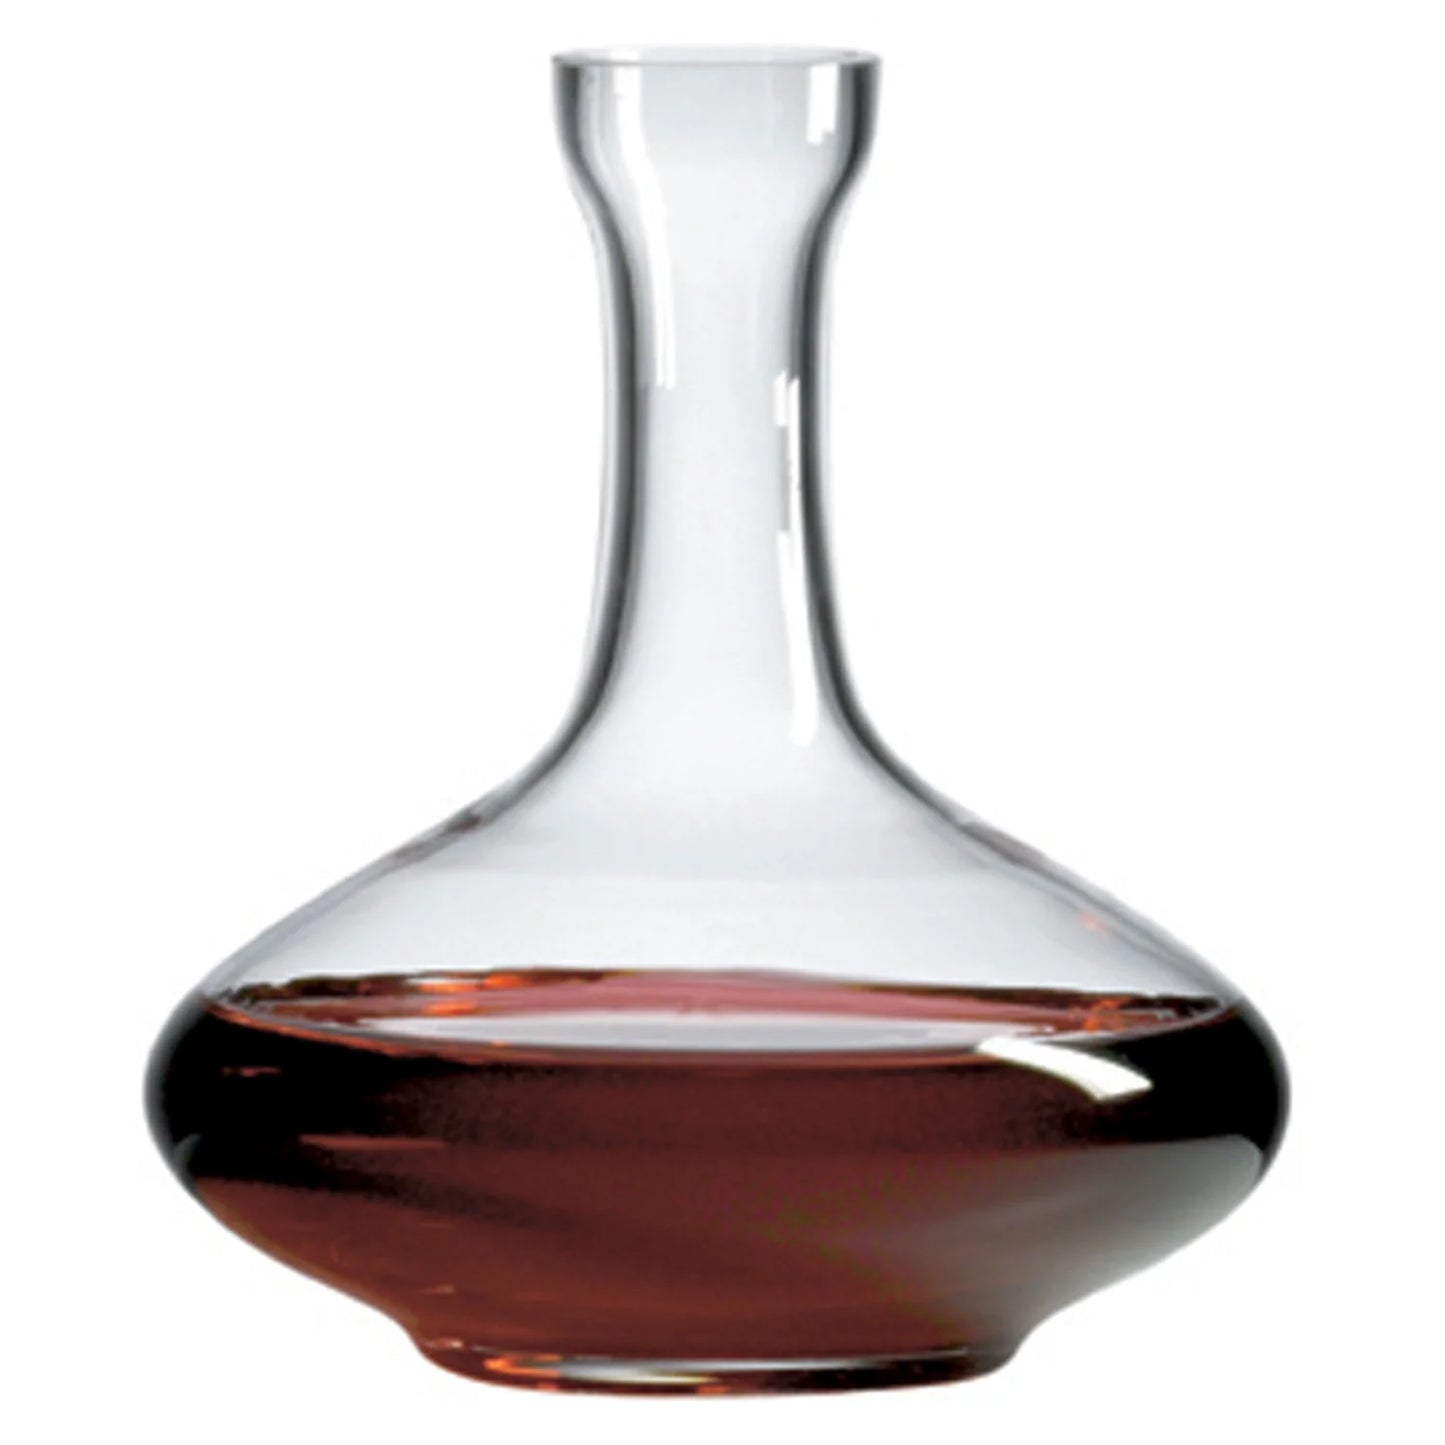 Ravenscroft Crystal Breathing Decanter with Free Luxury Satin Decanter Bag W3401